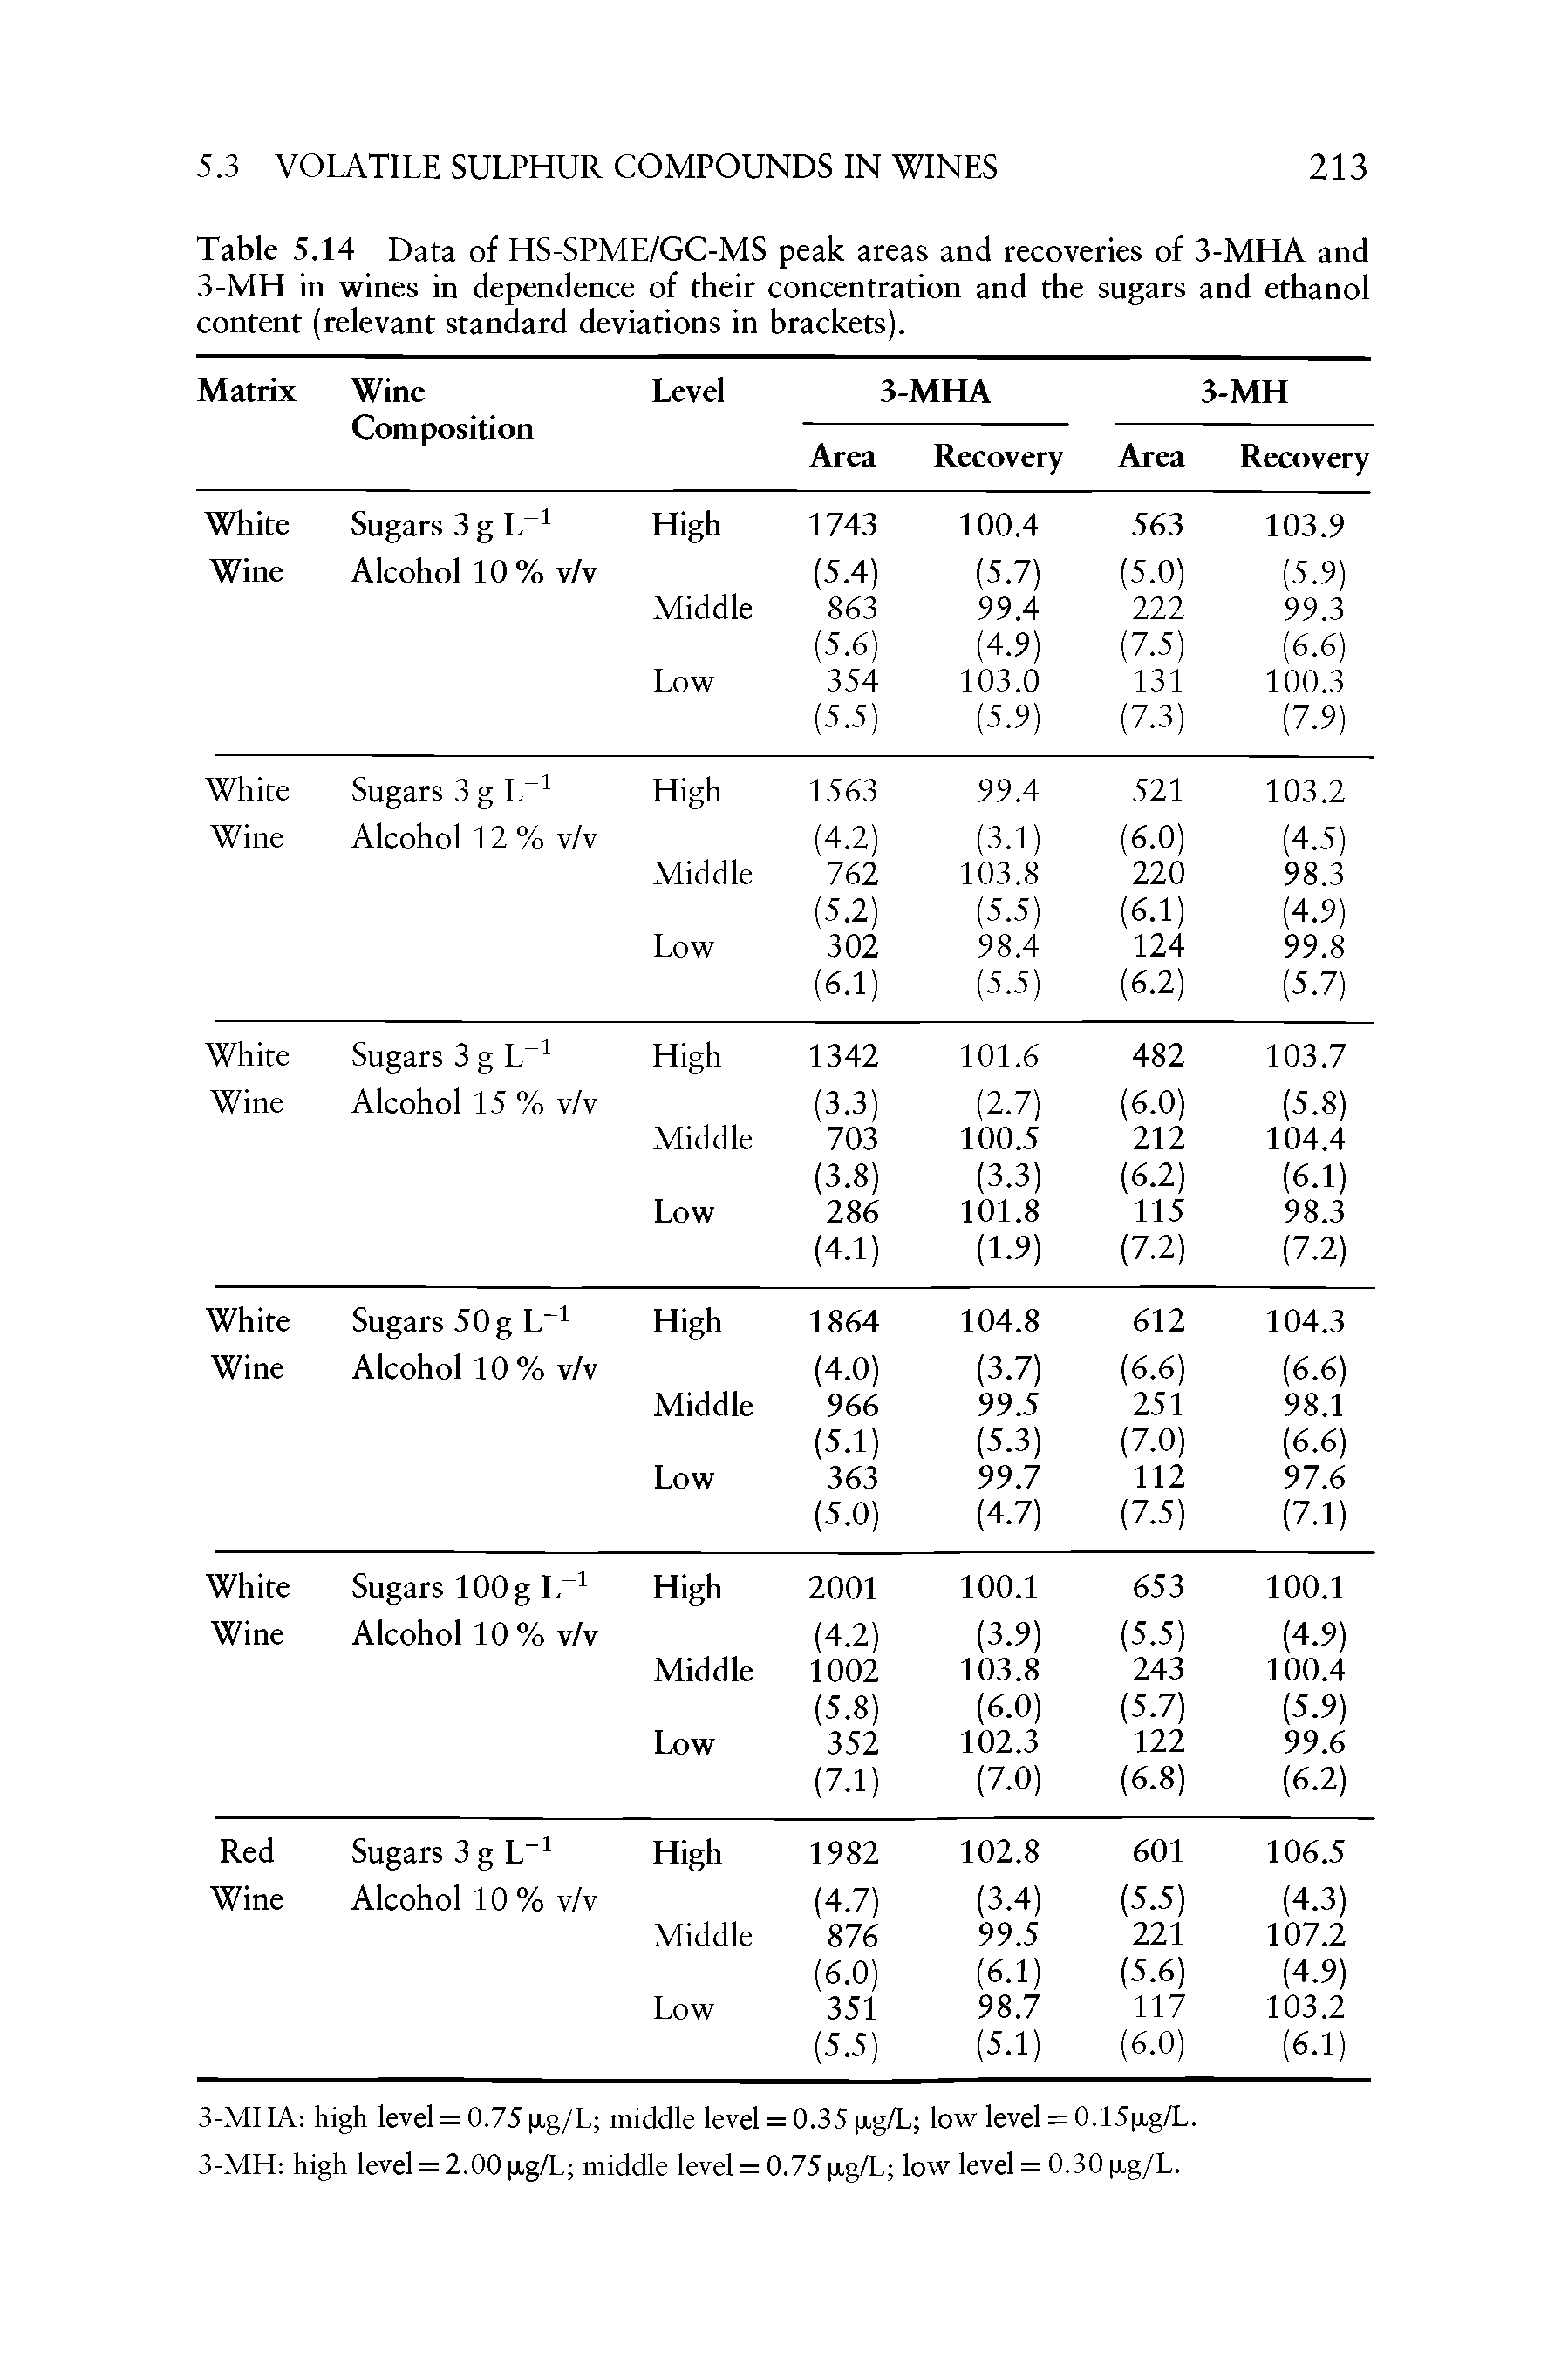 Table 5.14 Data of HS-SPME/GC-MS peak areas and recoveries of 3-MHA and 3-MH in wines in dependence of their concentration and the sugars and ethanol content (relevant standard deviations in brackets).